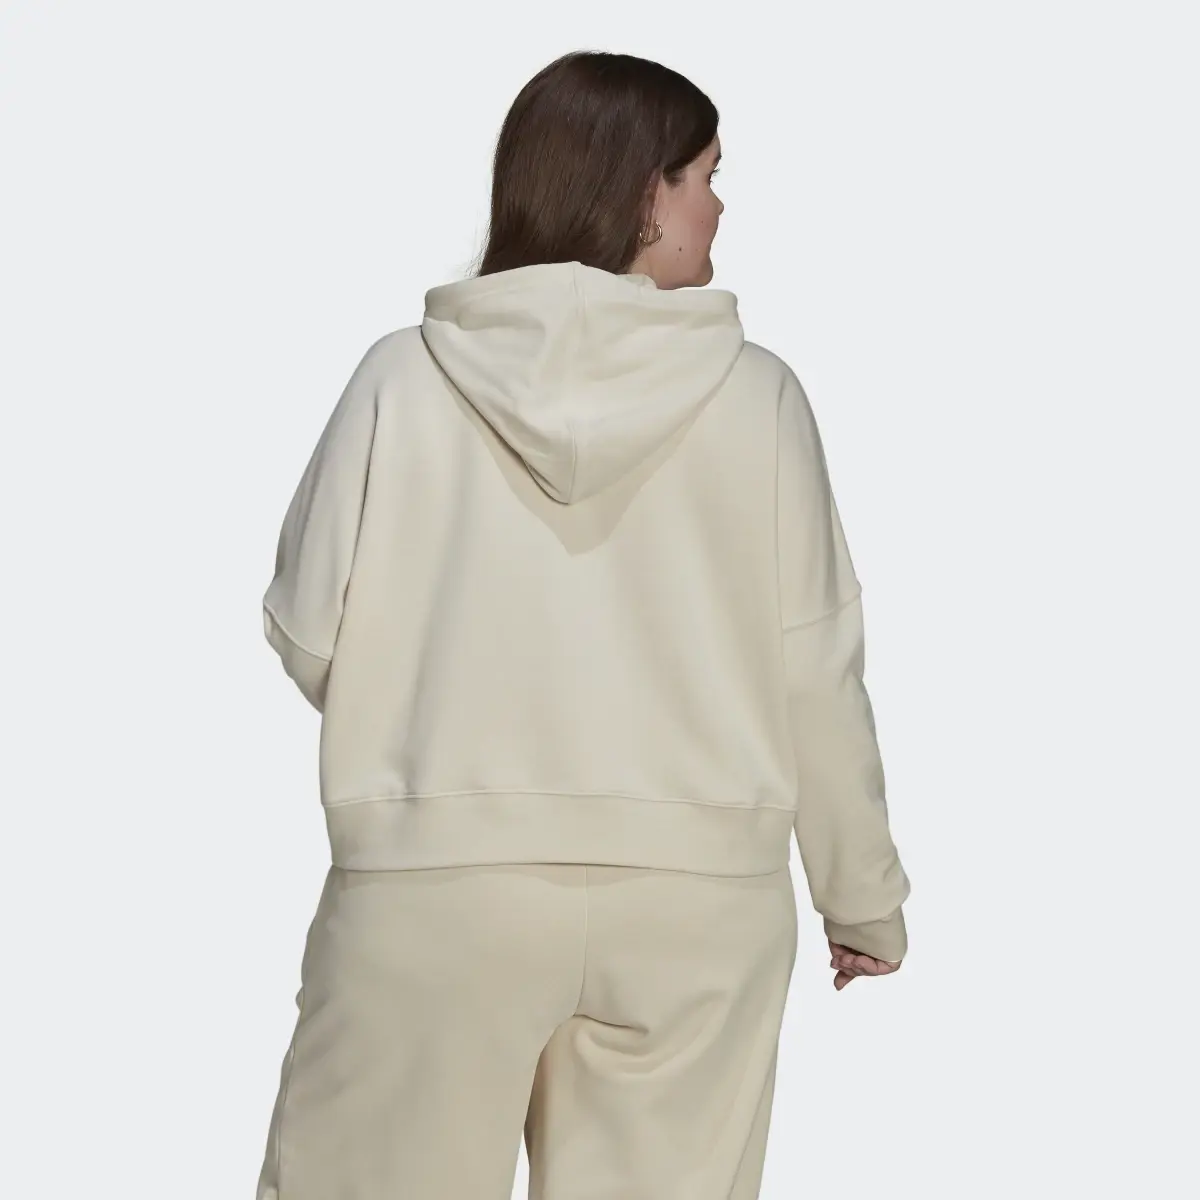 Adidas Cropped Hoodie (Plus Size). 3